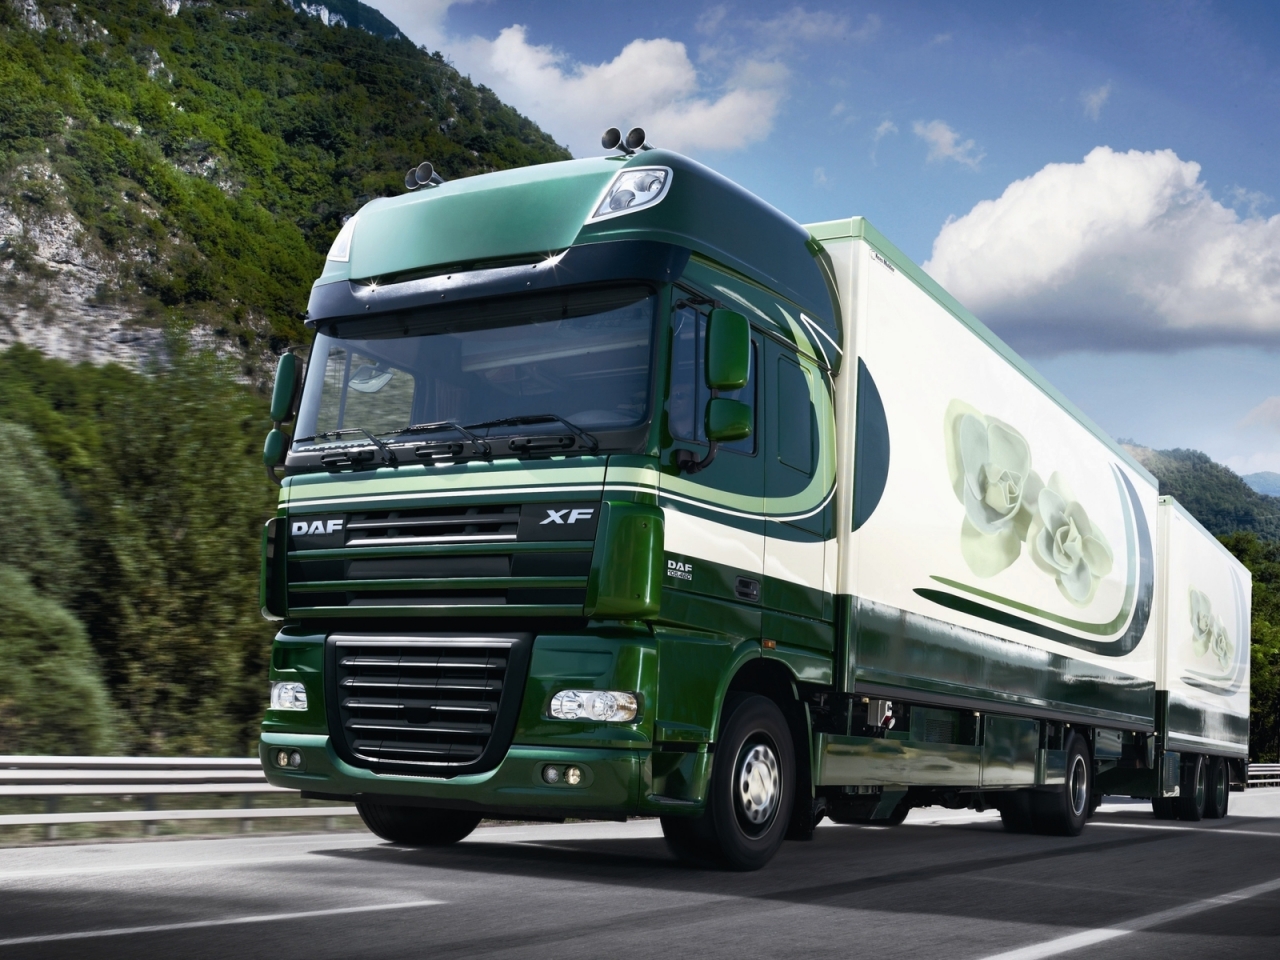 DAF XF 105 Truck for 1280 x 960 resolution